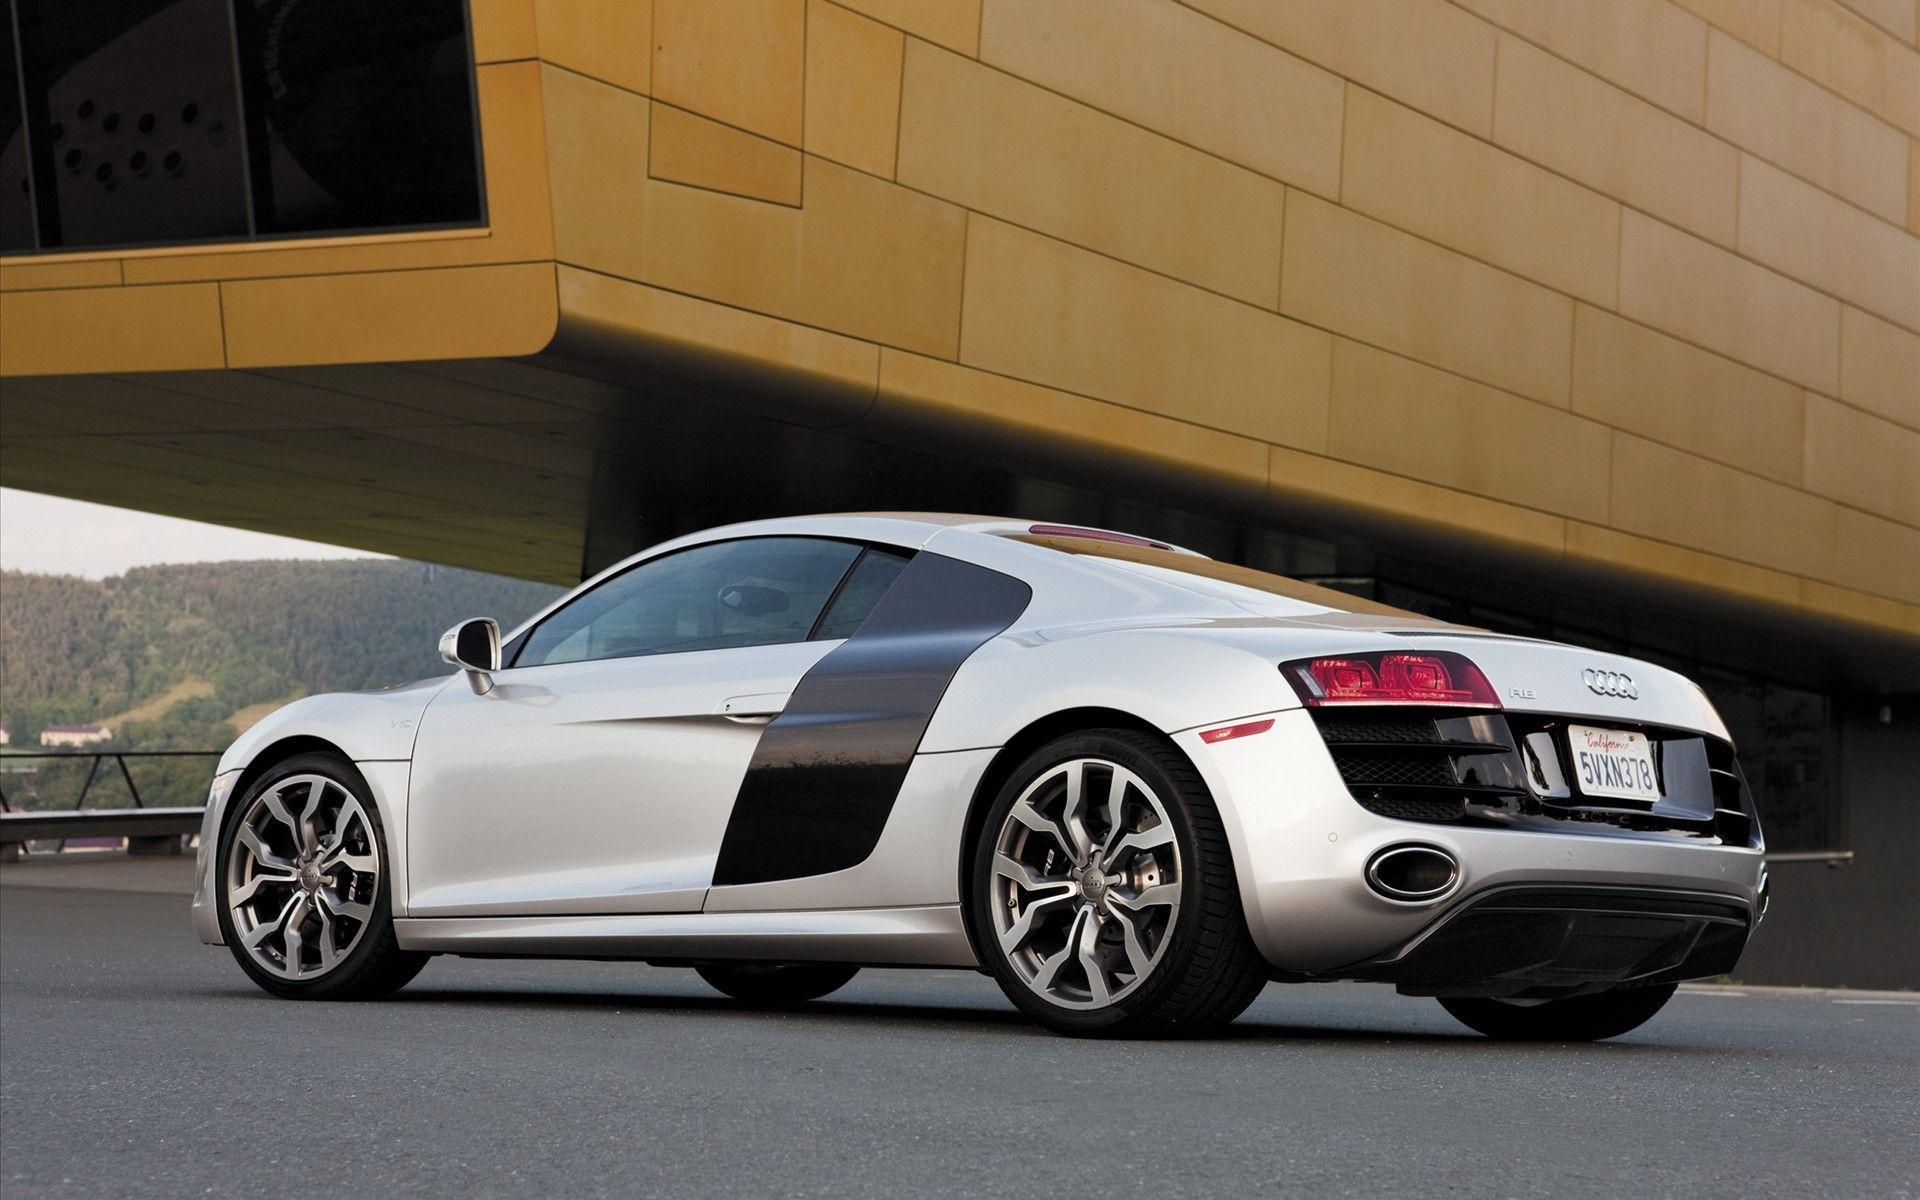 Audi R8 V10 Wallpaper. New and Used Cars Online Wallpaper. New